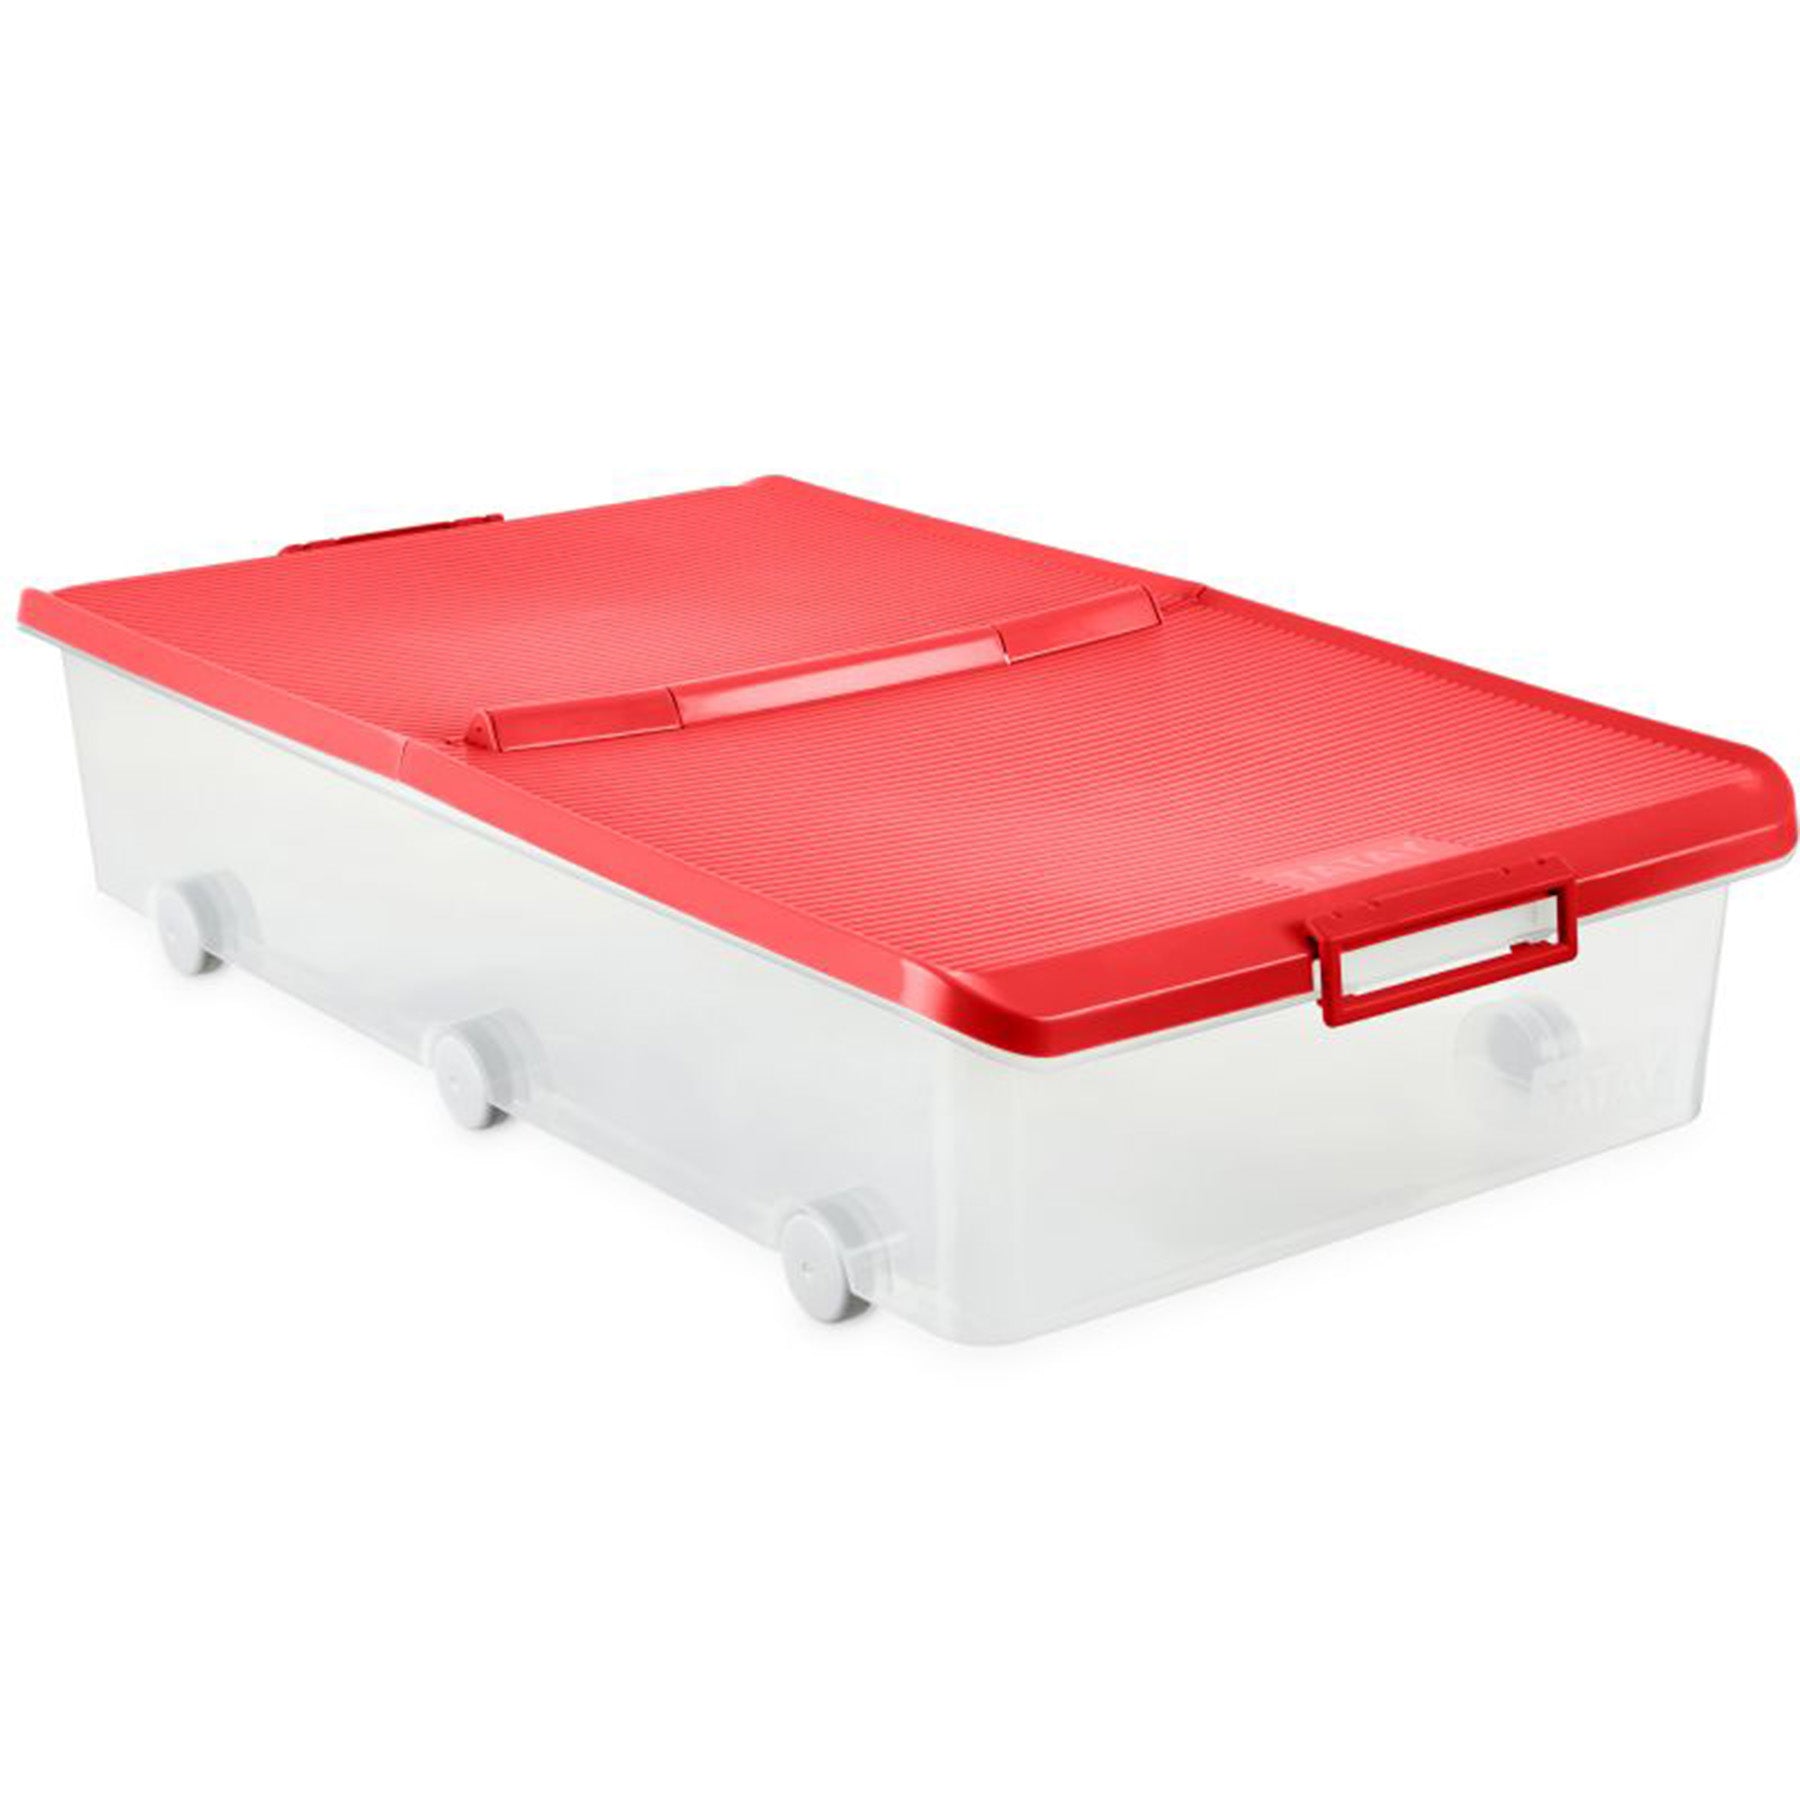 Under bed storage box with wheels - red/clear